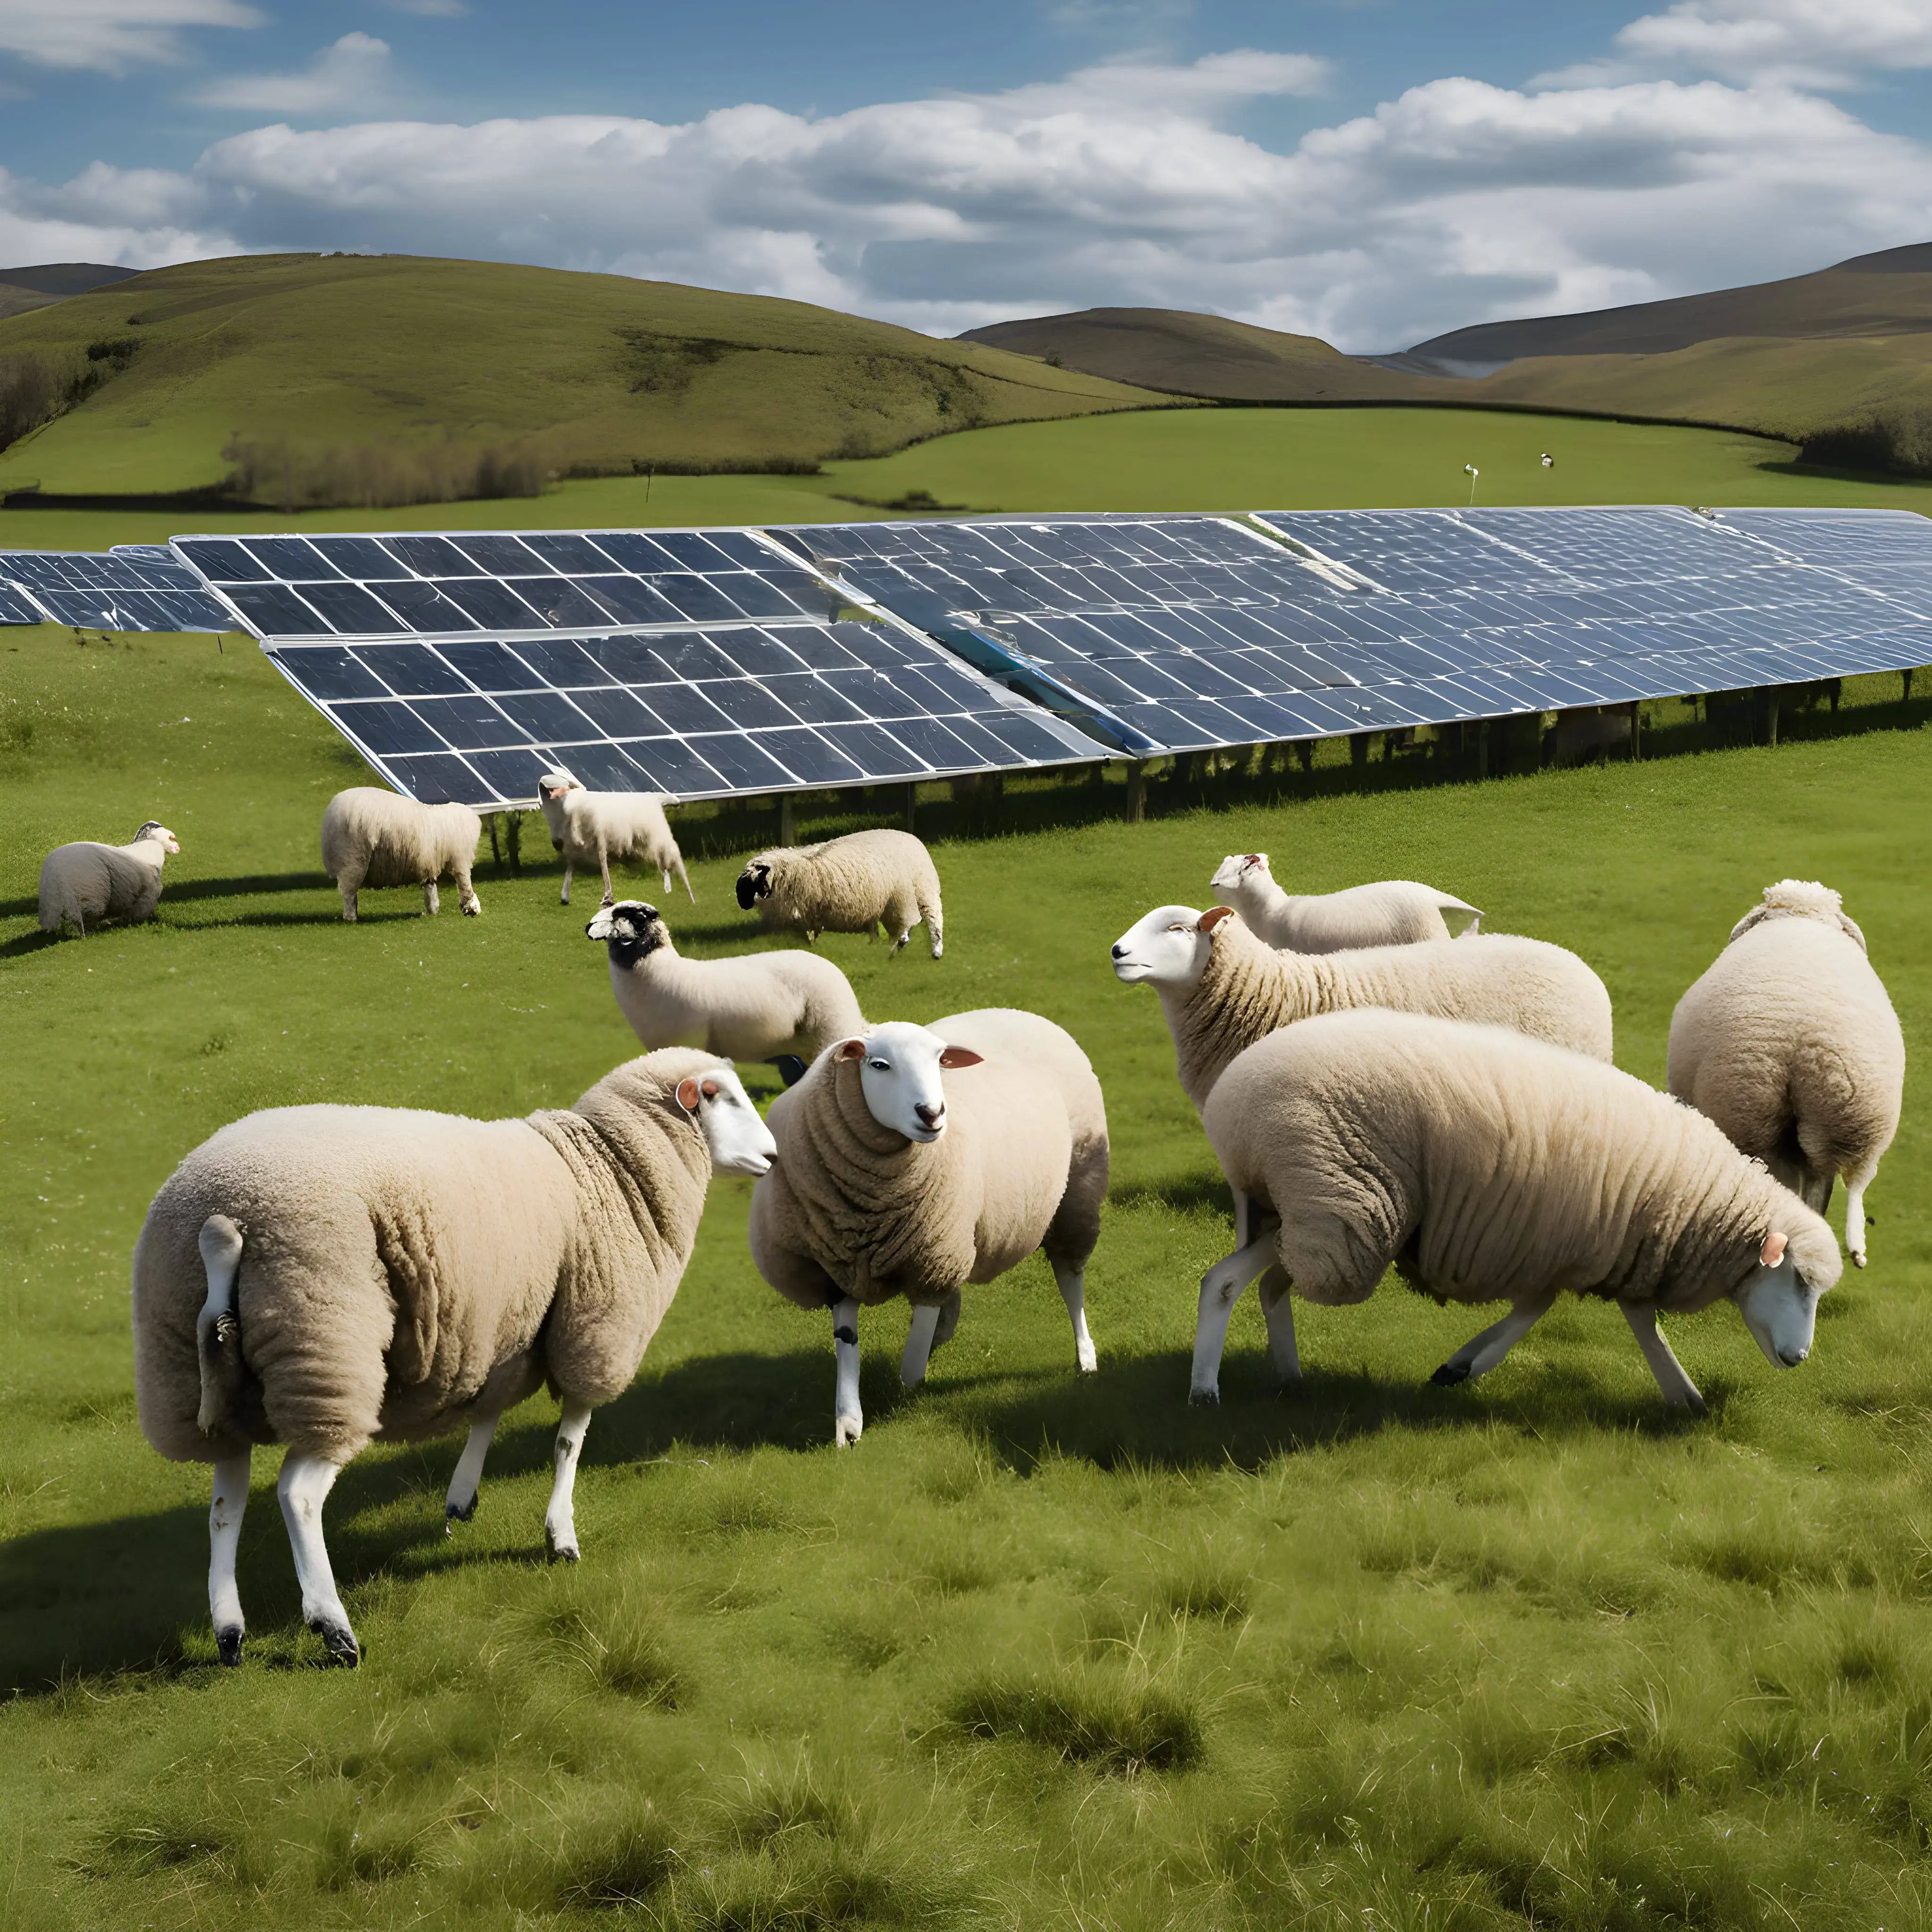 Sheep grazing on a grassy field with solar panels and rolling hills in the background under a partly cloudy sky, illustrating a smart investment in renewable energy solutions.